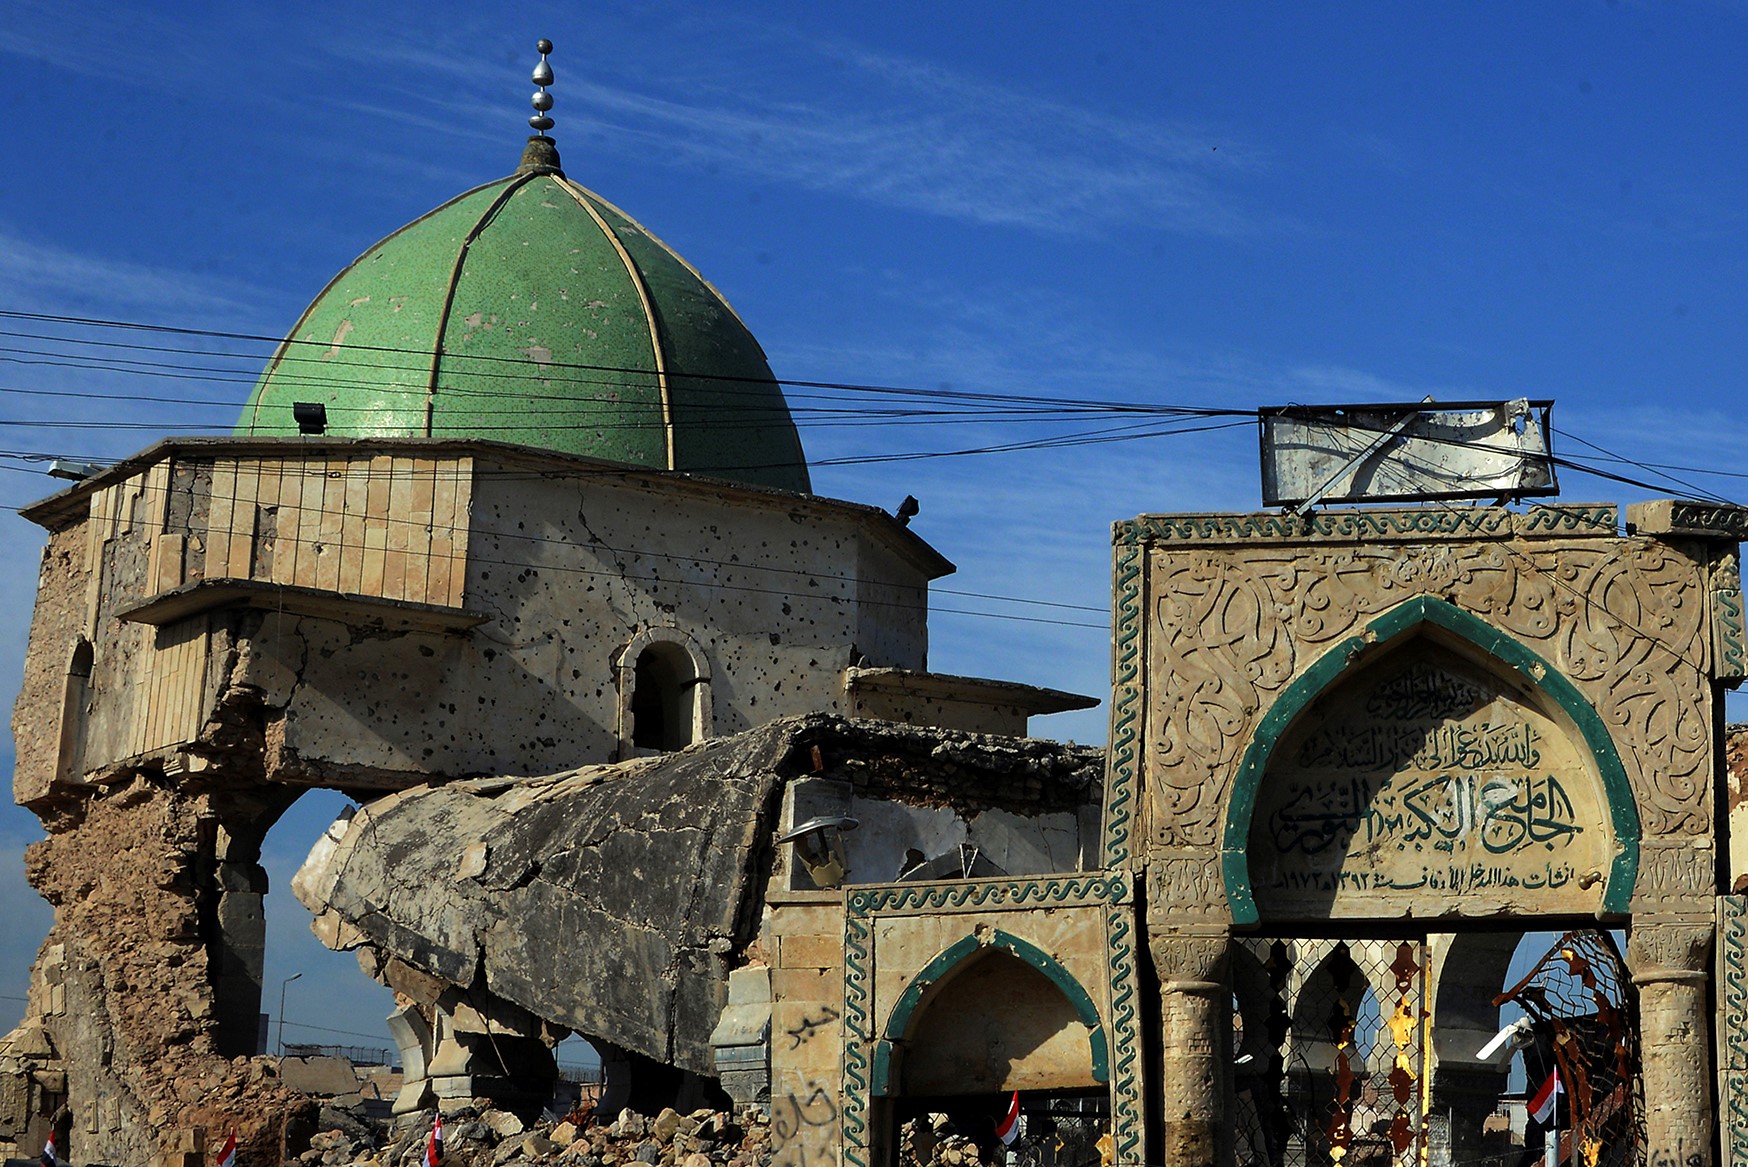  The Great Mosque of al-Nuri and the remains of "Al-Hadba" leaning minaret in Mosul’s war-ravaged Old City on 18 December, 2018 (AFP)